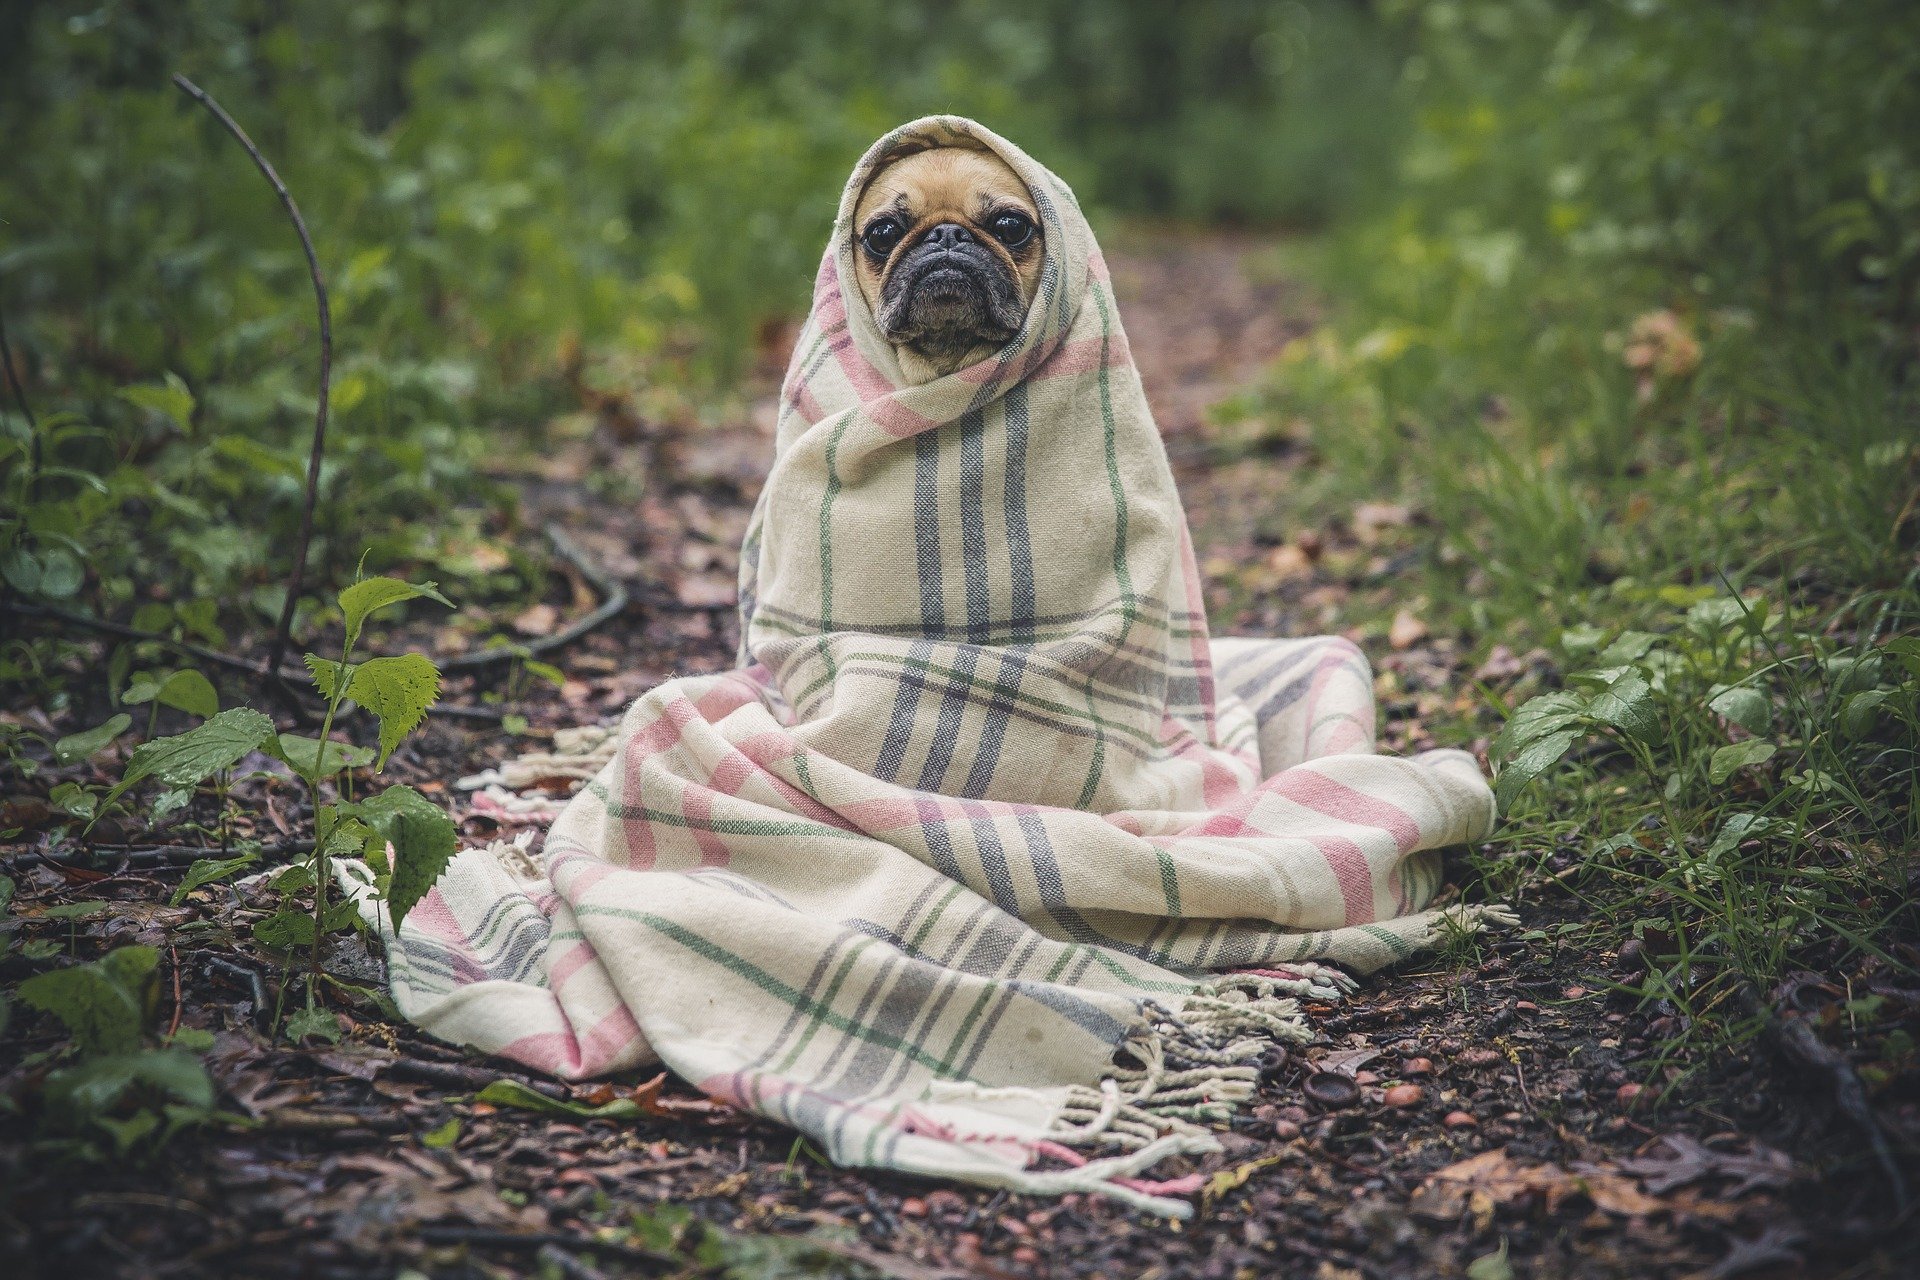 A Pug Dog cosily wrapped in a blanket. | Source: Pixabay.